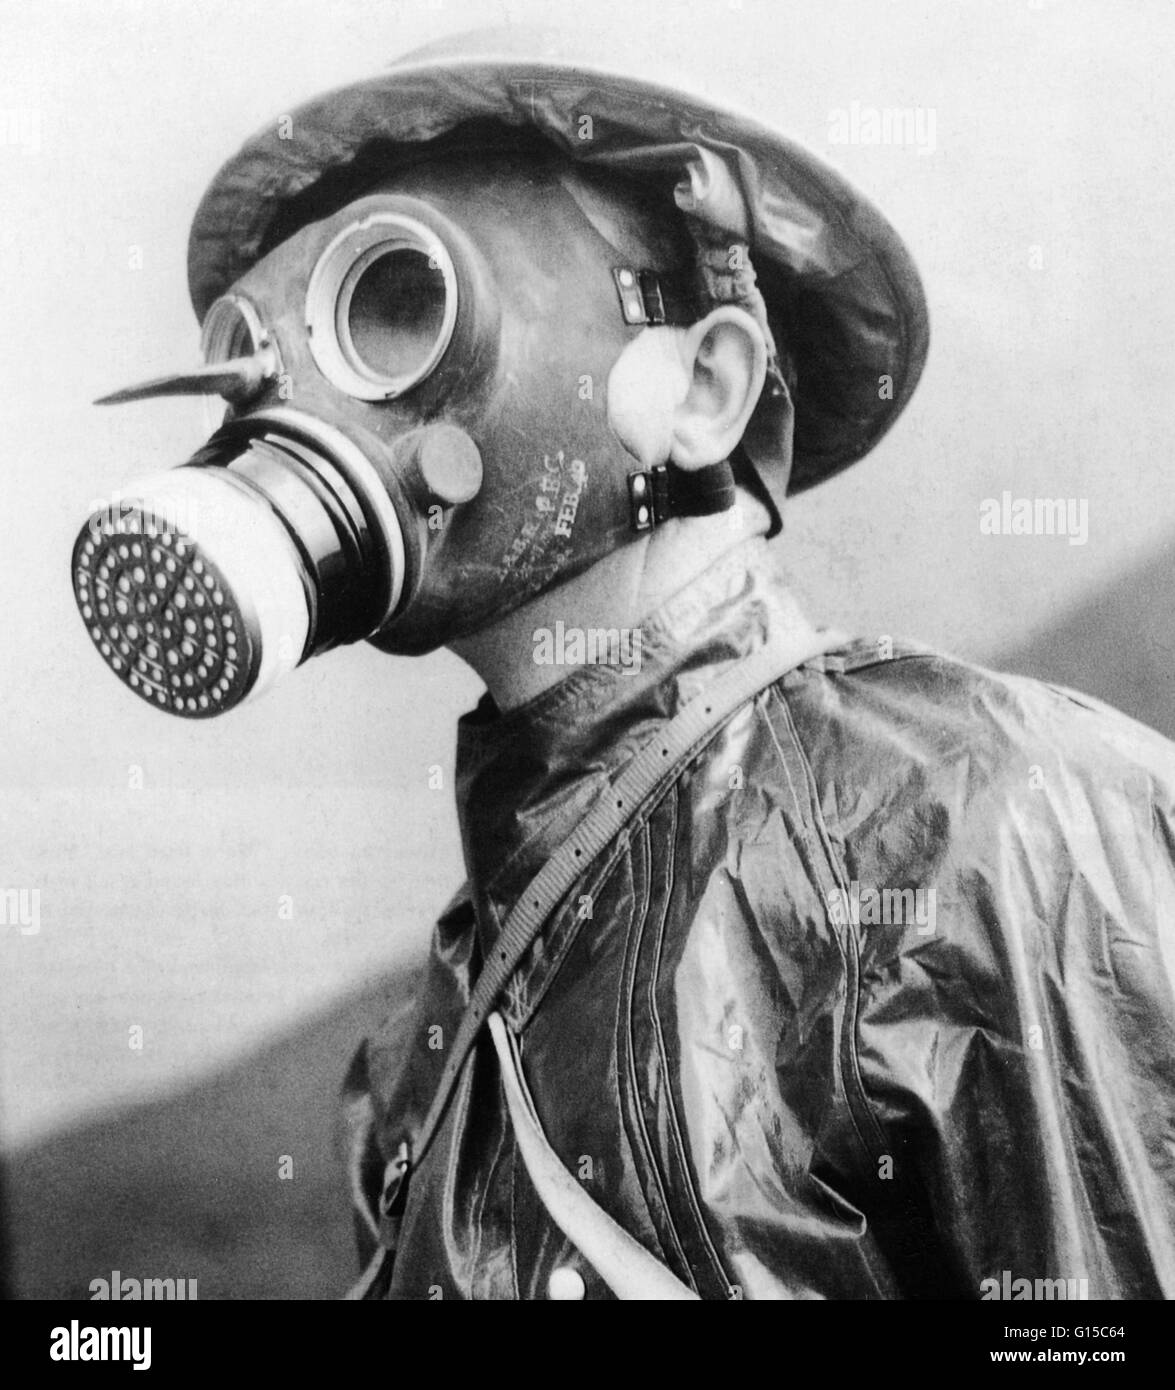 British soldier wearing a gas mask and protective suit in 1940, during the second World War. Stock Photo